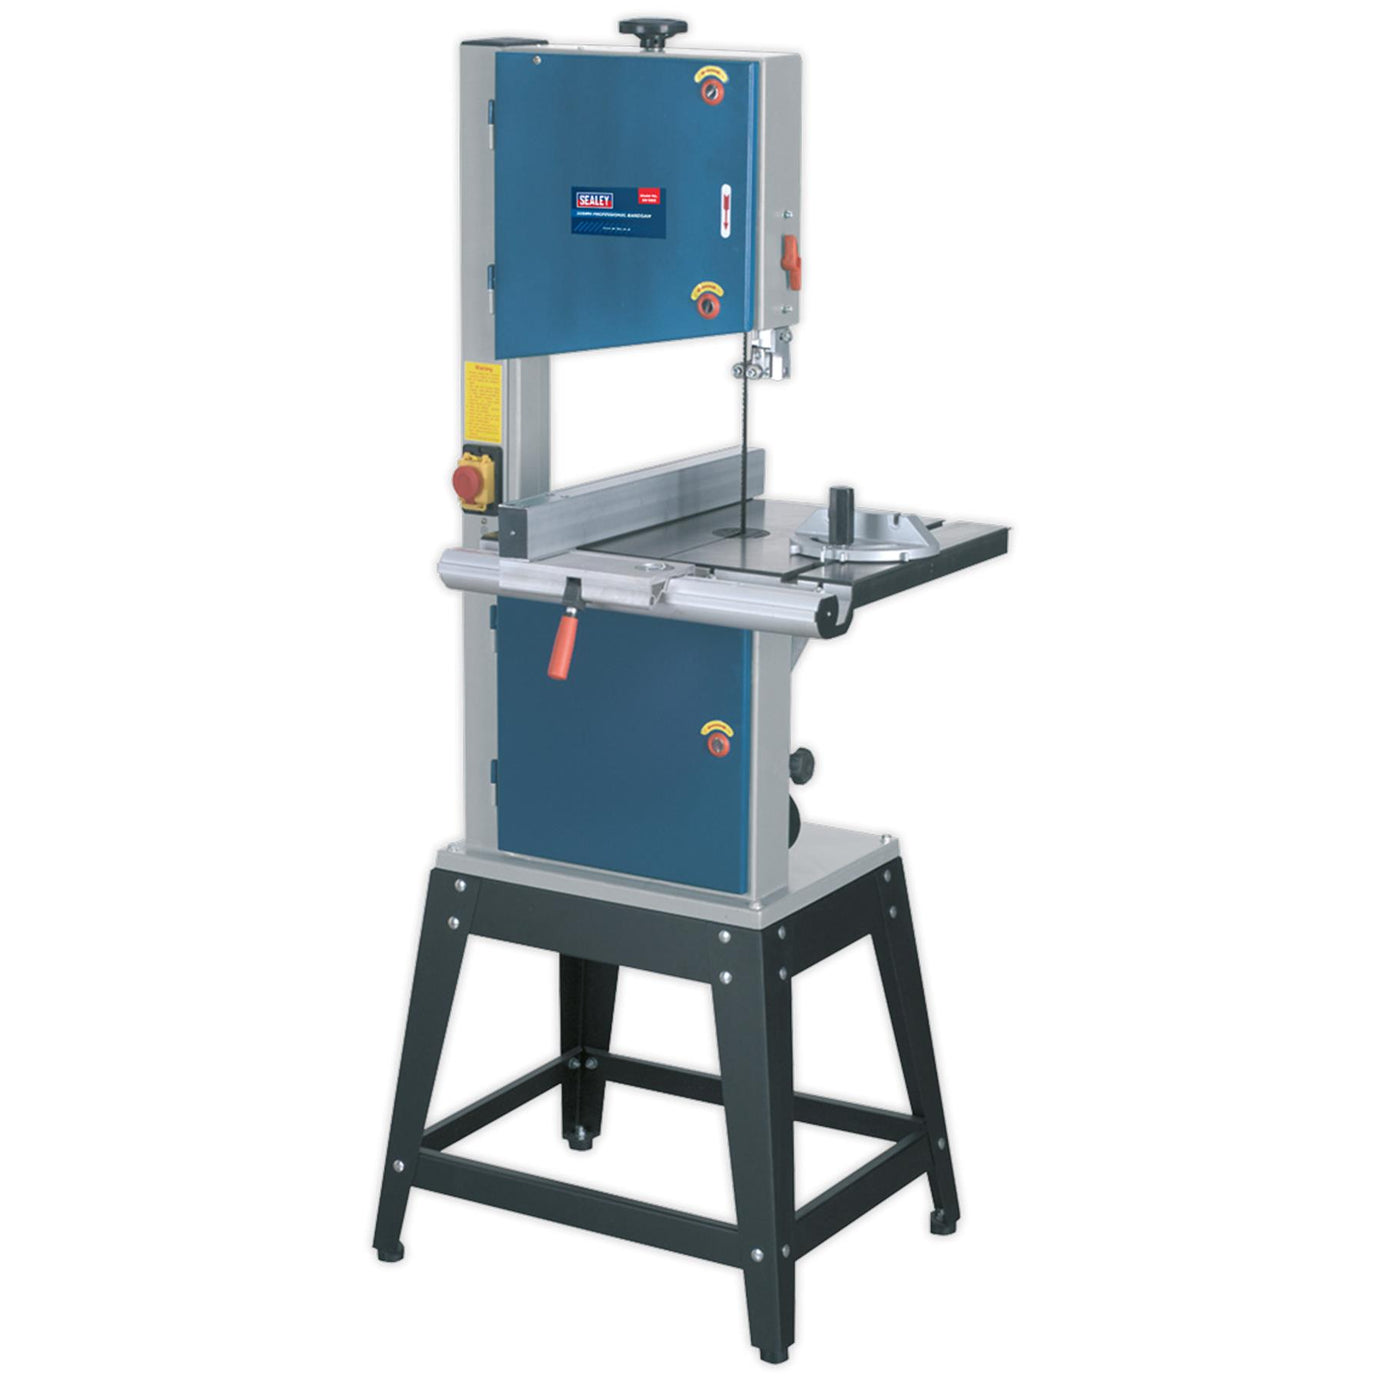 Sealey Professional Bandsaw 305mm  Suitable For Cutting Wood and plastics.